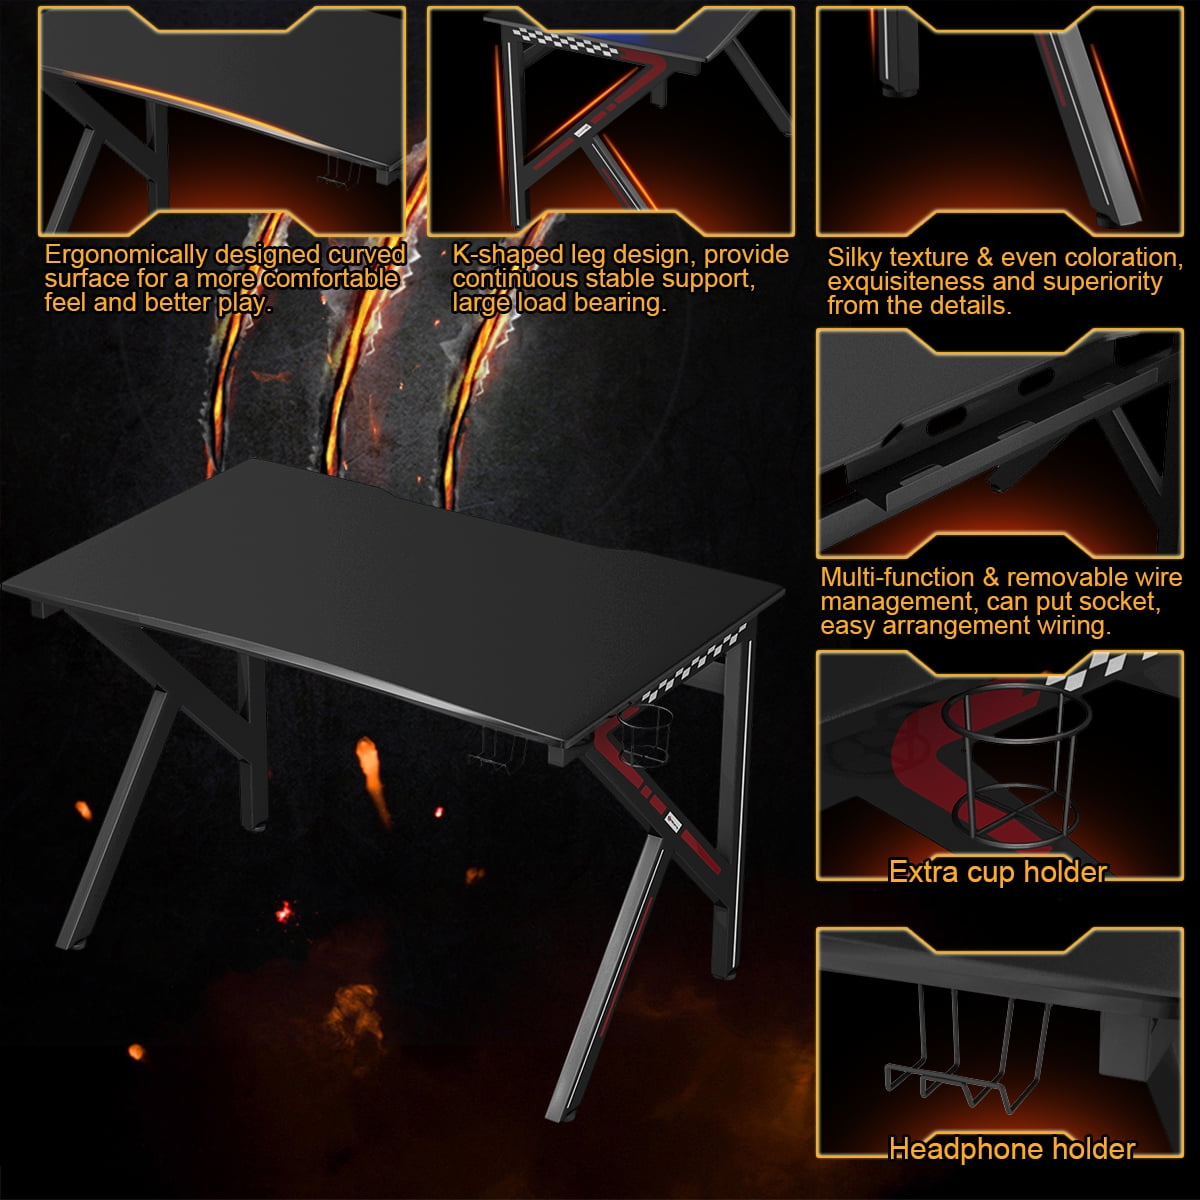 Costway 29.5 in. Black Metal Gaming Desk Gamers Computer Desk E-sports K-shaped with Cup Holder Hook Home